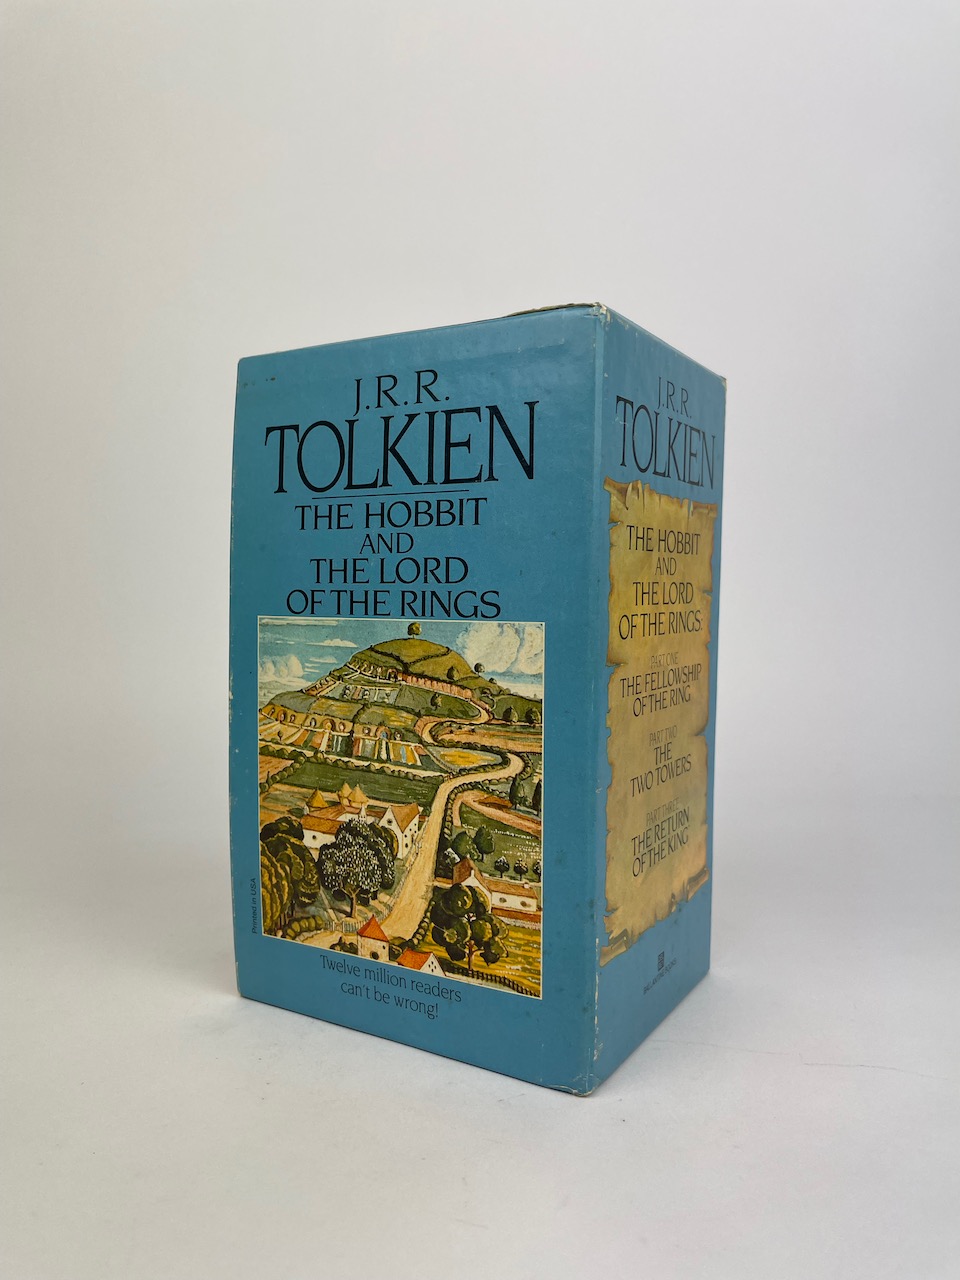 The Hobbit and The Lord of the Rings, Four Paperback Book Boxset from 1986, Blue Slipcase art by J.R.R. Tolkien 4